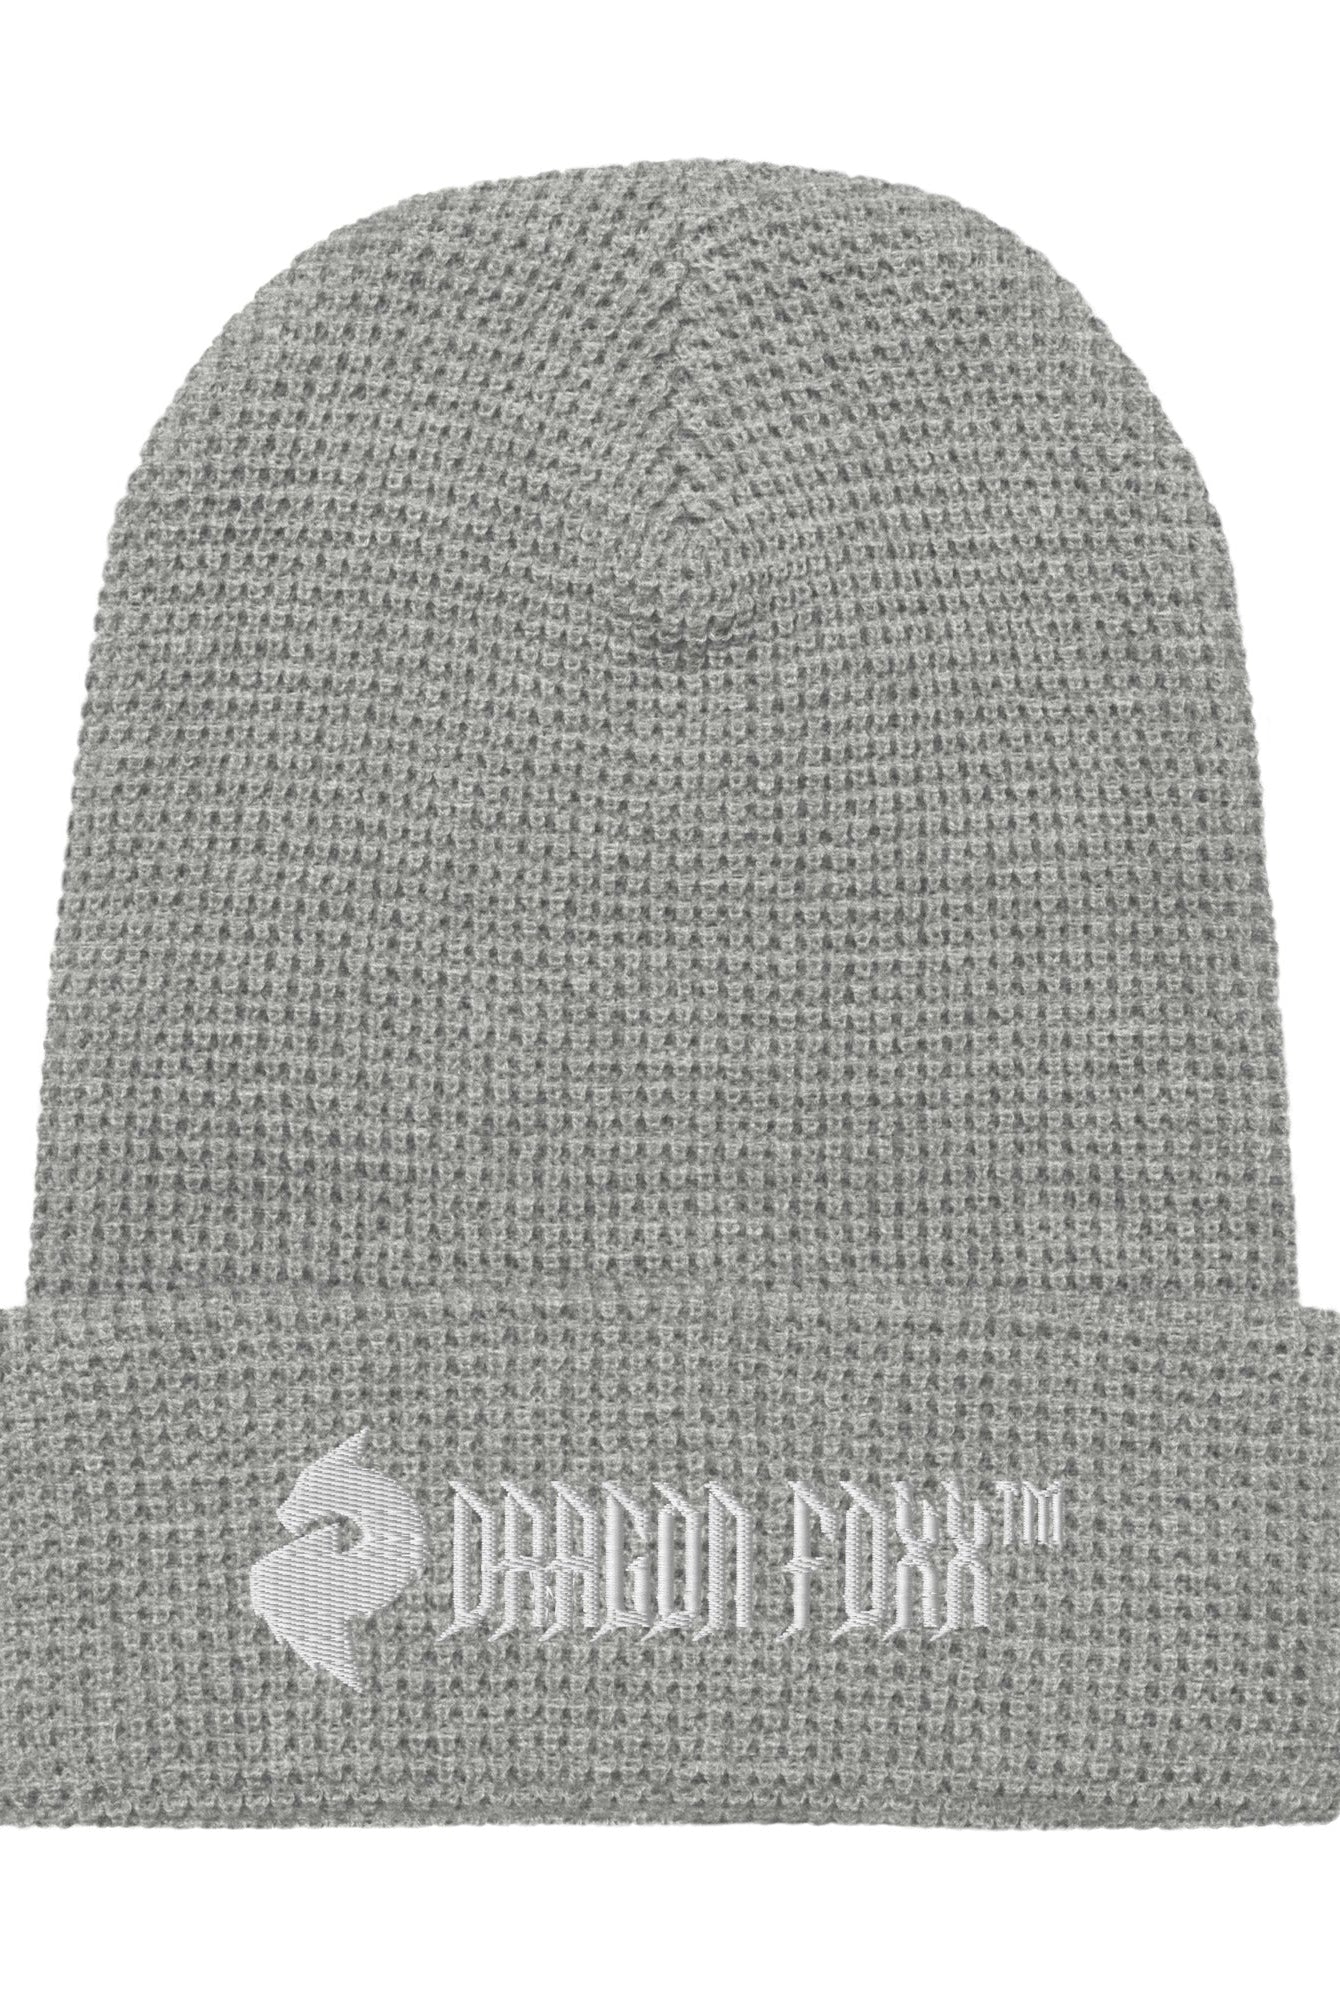 His or Hers Dragon Foxx™ Waffle beanie in 7 Colors - His or Hers Dragon Foxx™ Waffle beanie - DRAGON FOXX™ - His or Hers Dragon Foxx™ Waffle beanie in 7 Colors - 3986040_16177 - Heather Grey - - Accessories - Beanie - Beanies